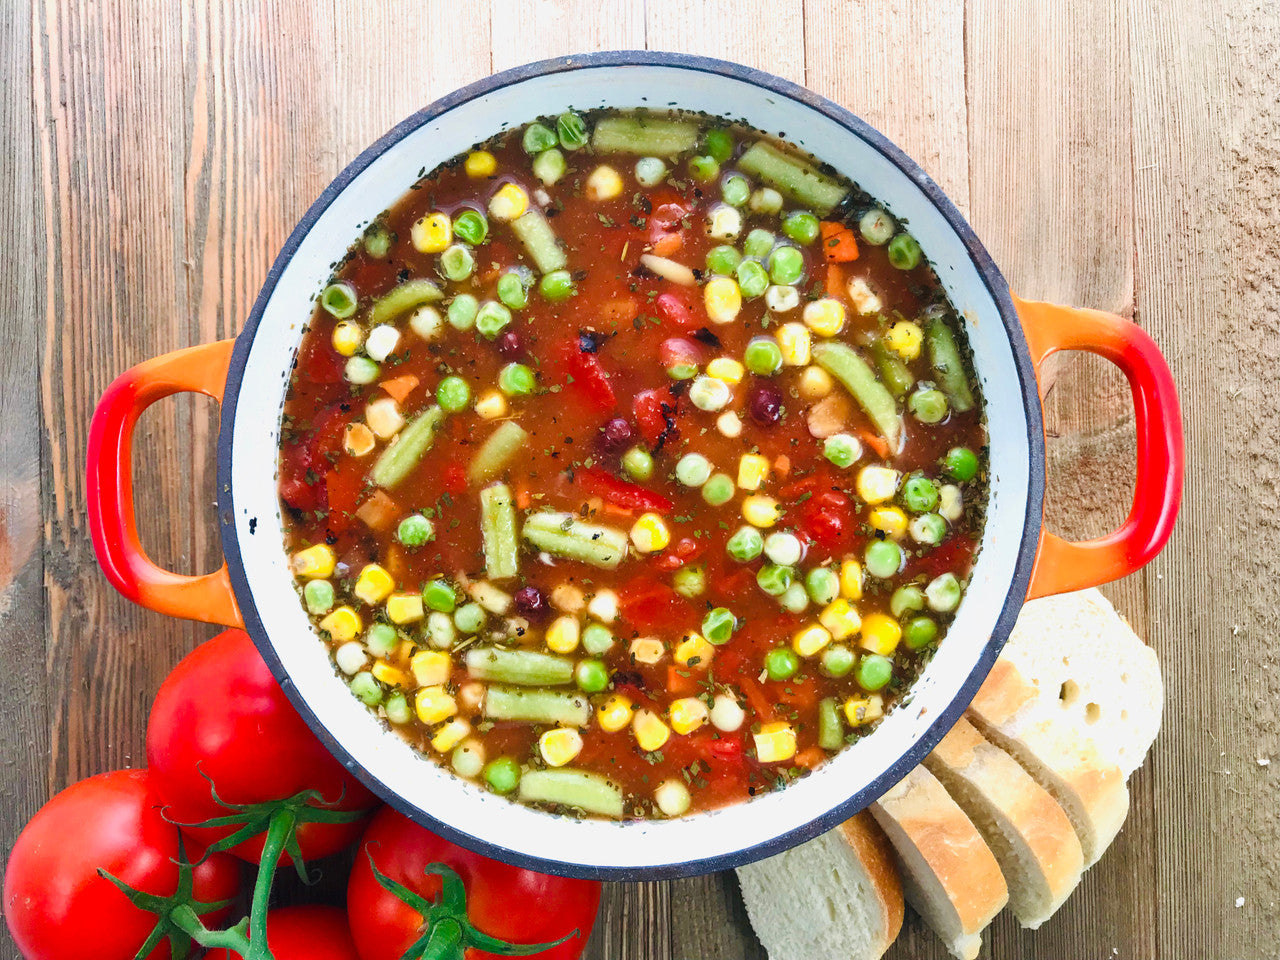 vegetable orzo soup displayed in a pot next to tomatoes and sliced bread on a wooden surface